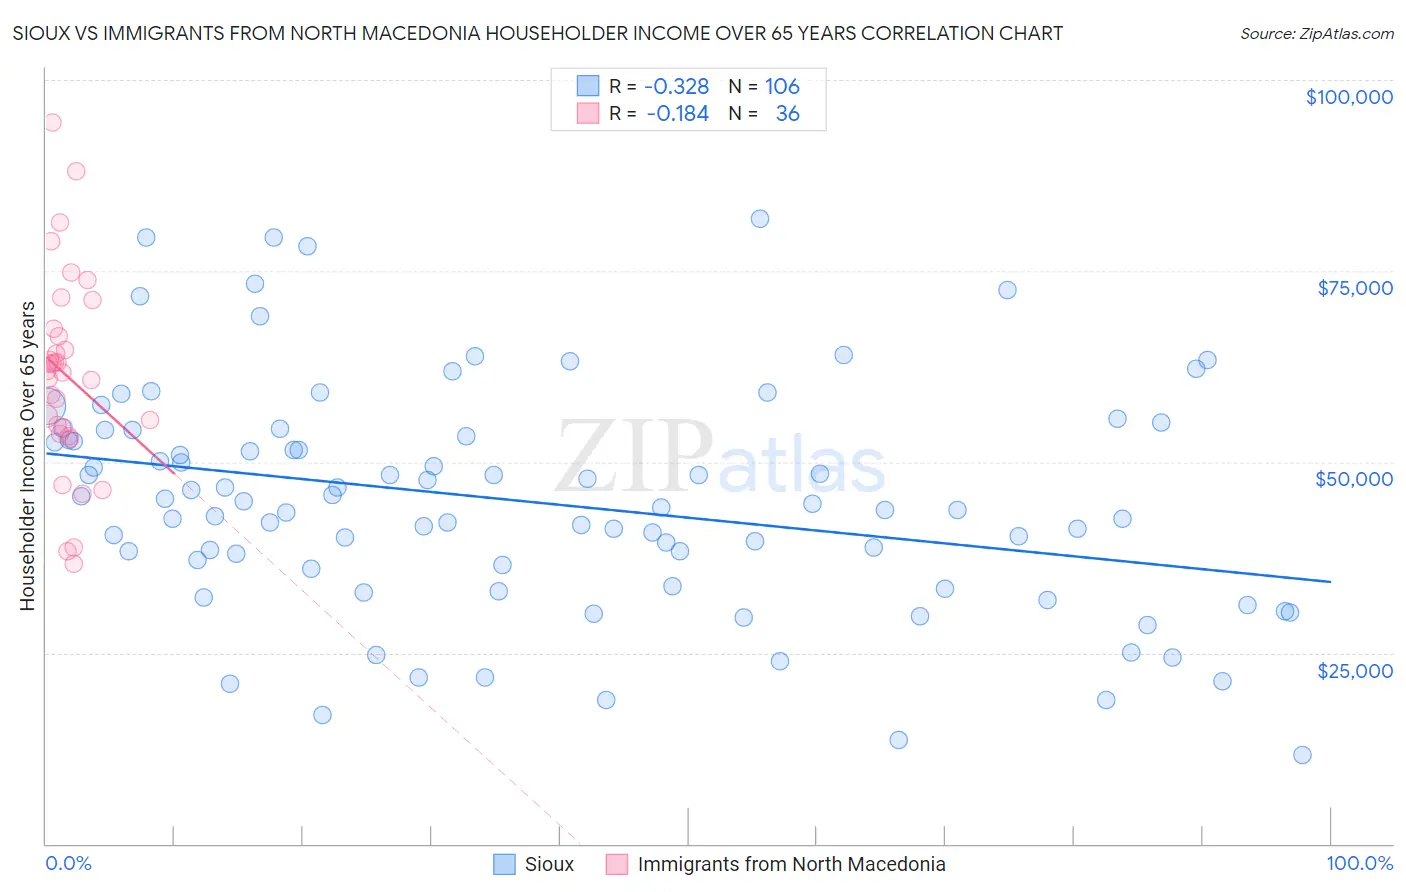 Sioux vs Immigrants from North Macedonia Householder Income Over 65 years